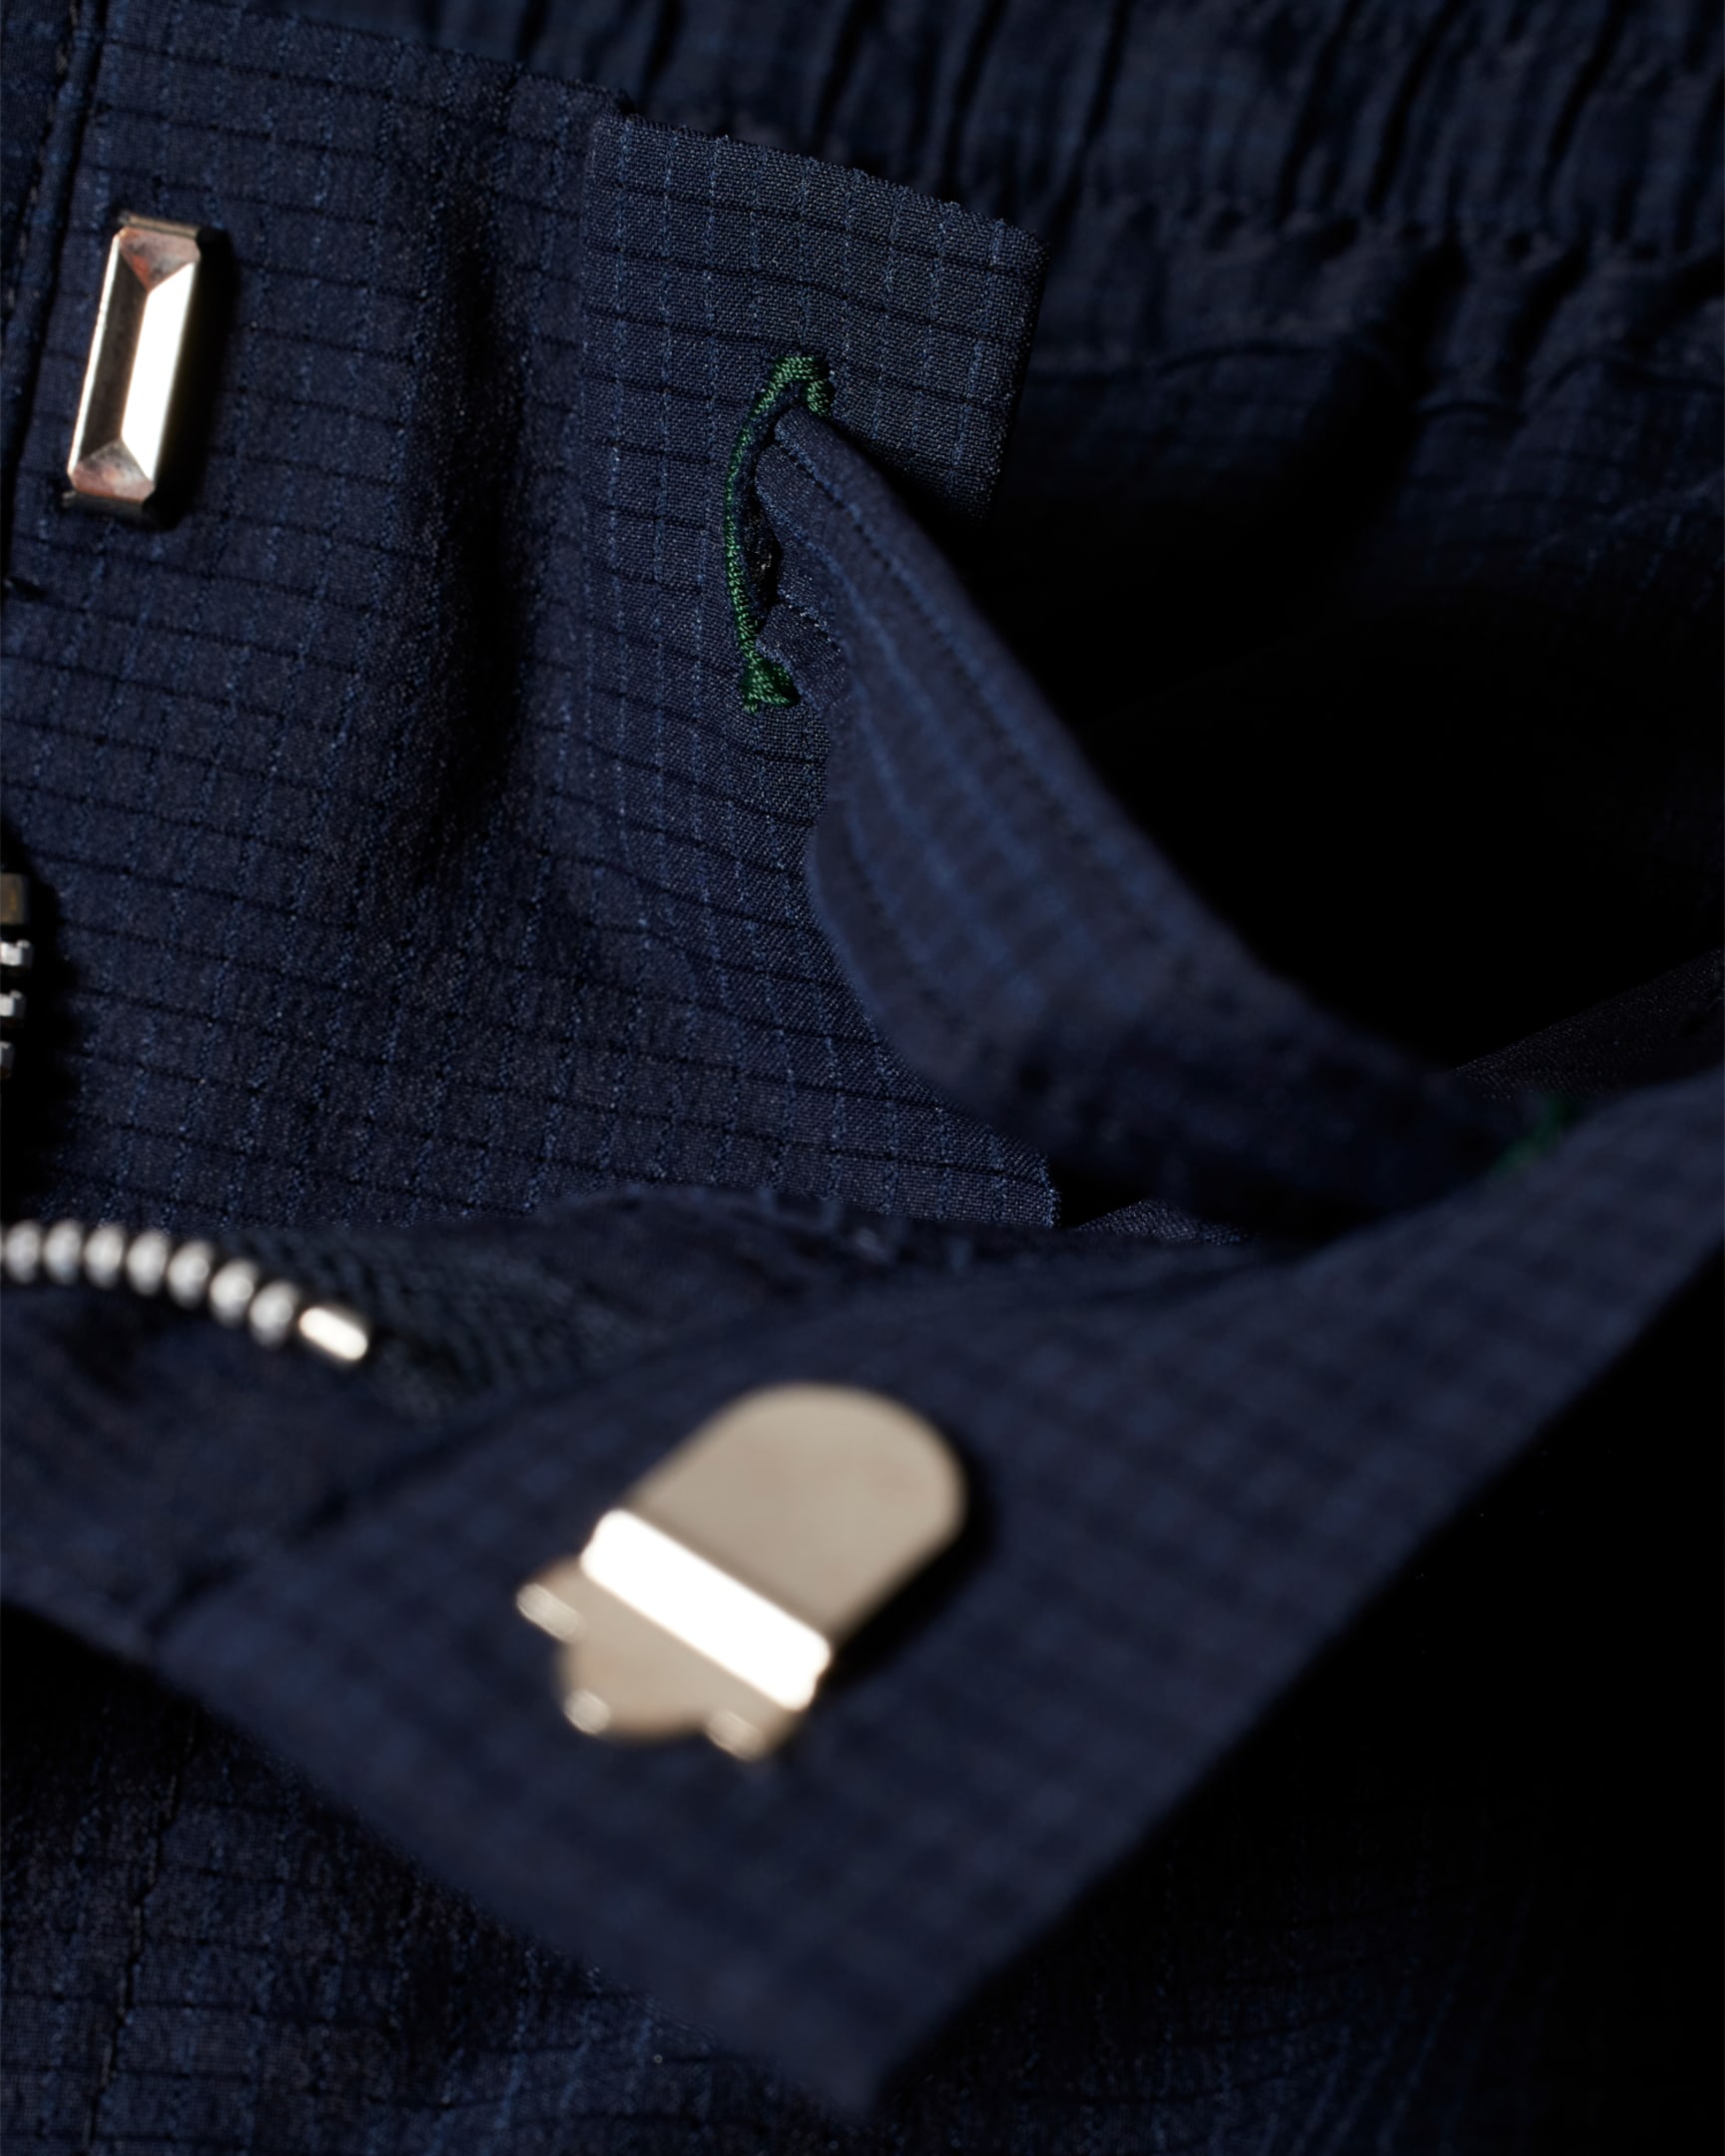 Detail View - Navy Lightweight Sport Chinos Paul Smith